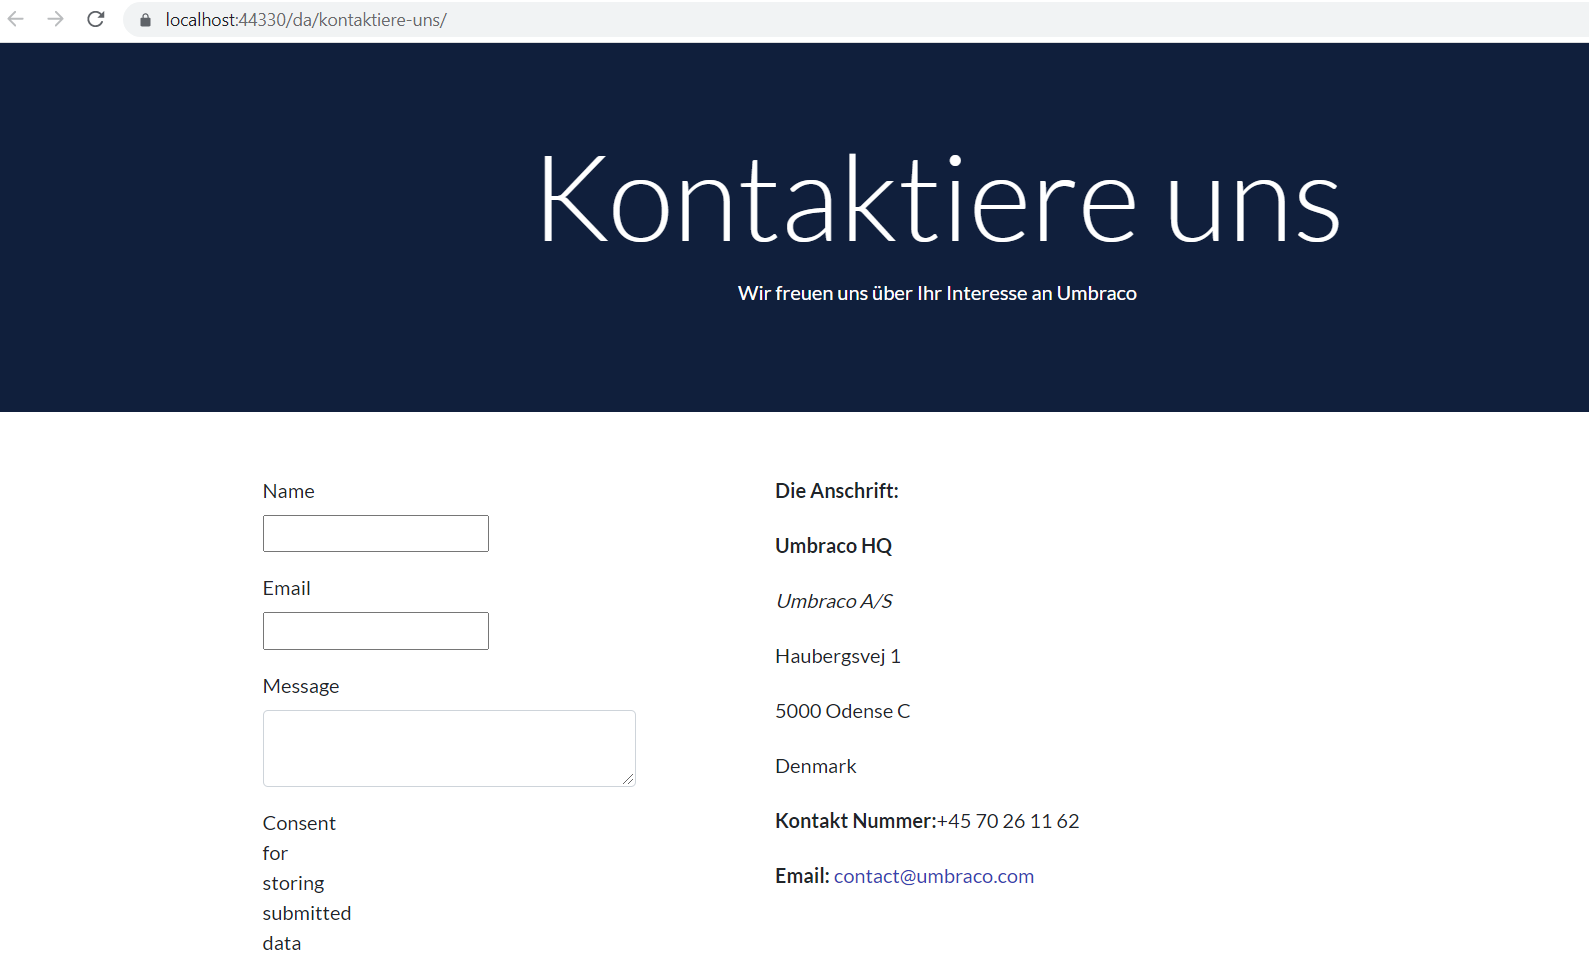 German version of Contact Us page